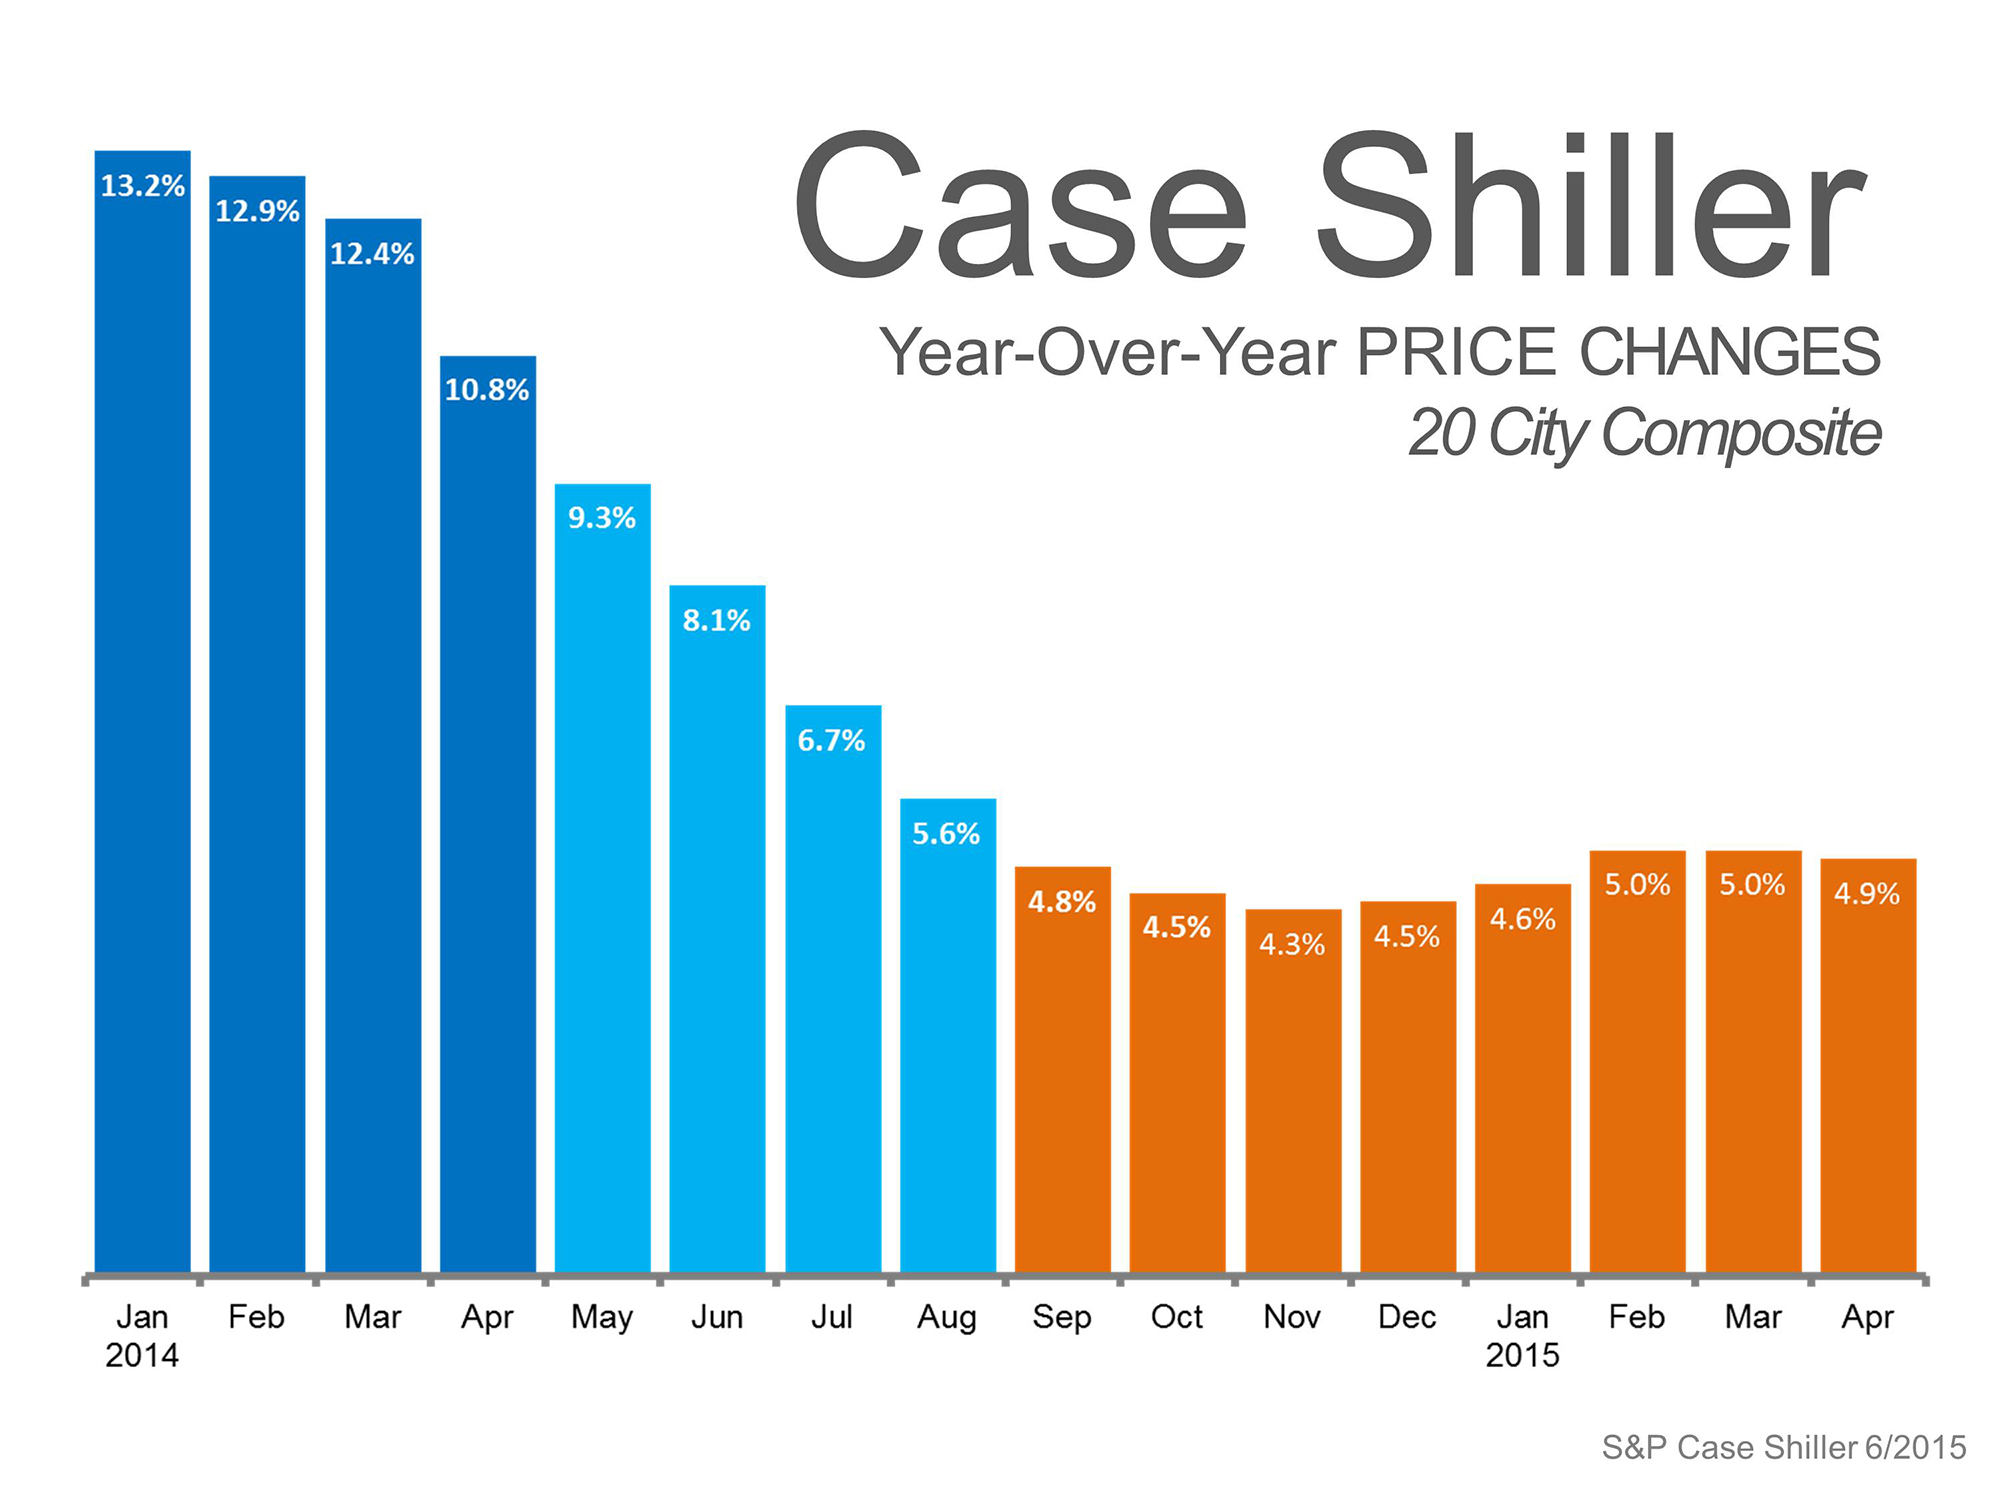 Case Shiller Price Changes | Simplifying The Market